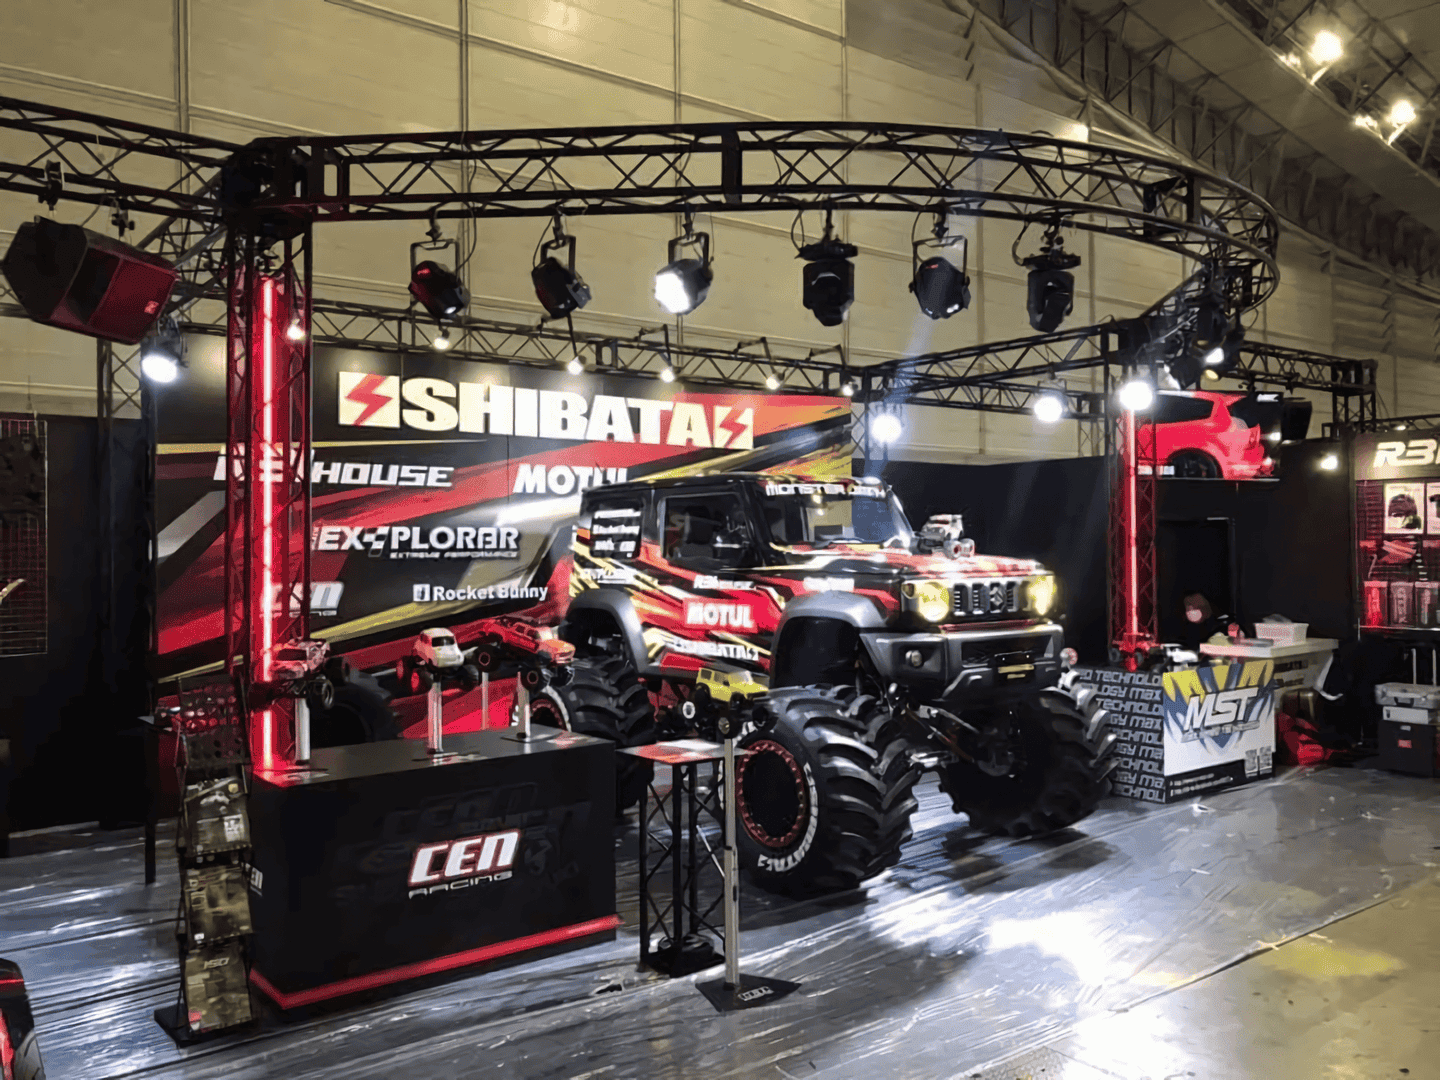 This Giant Suzuki Jimny Monster Truck Is the Star of the 2019 Tokyo Auto Salon